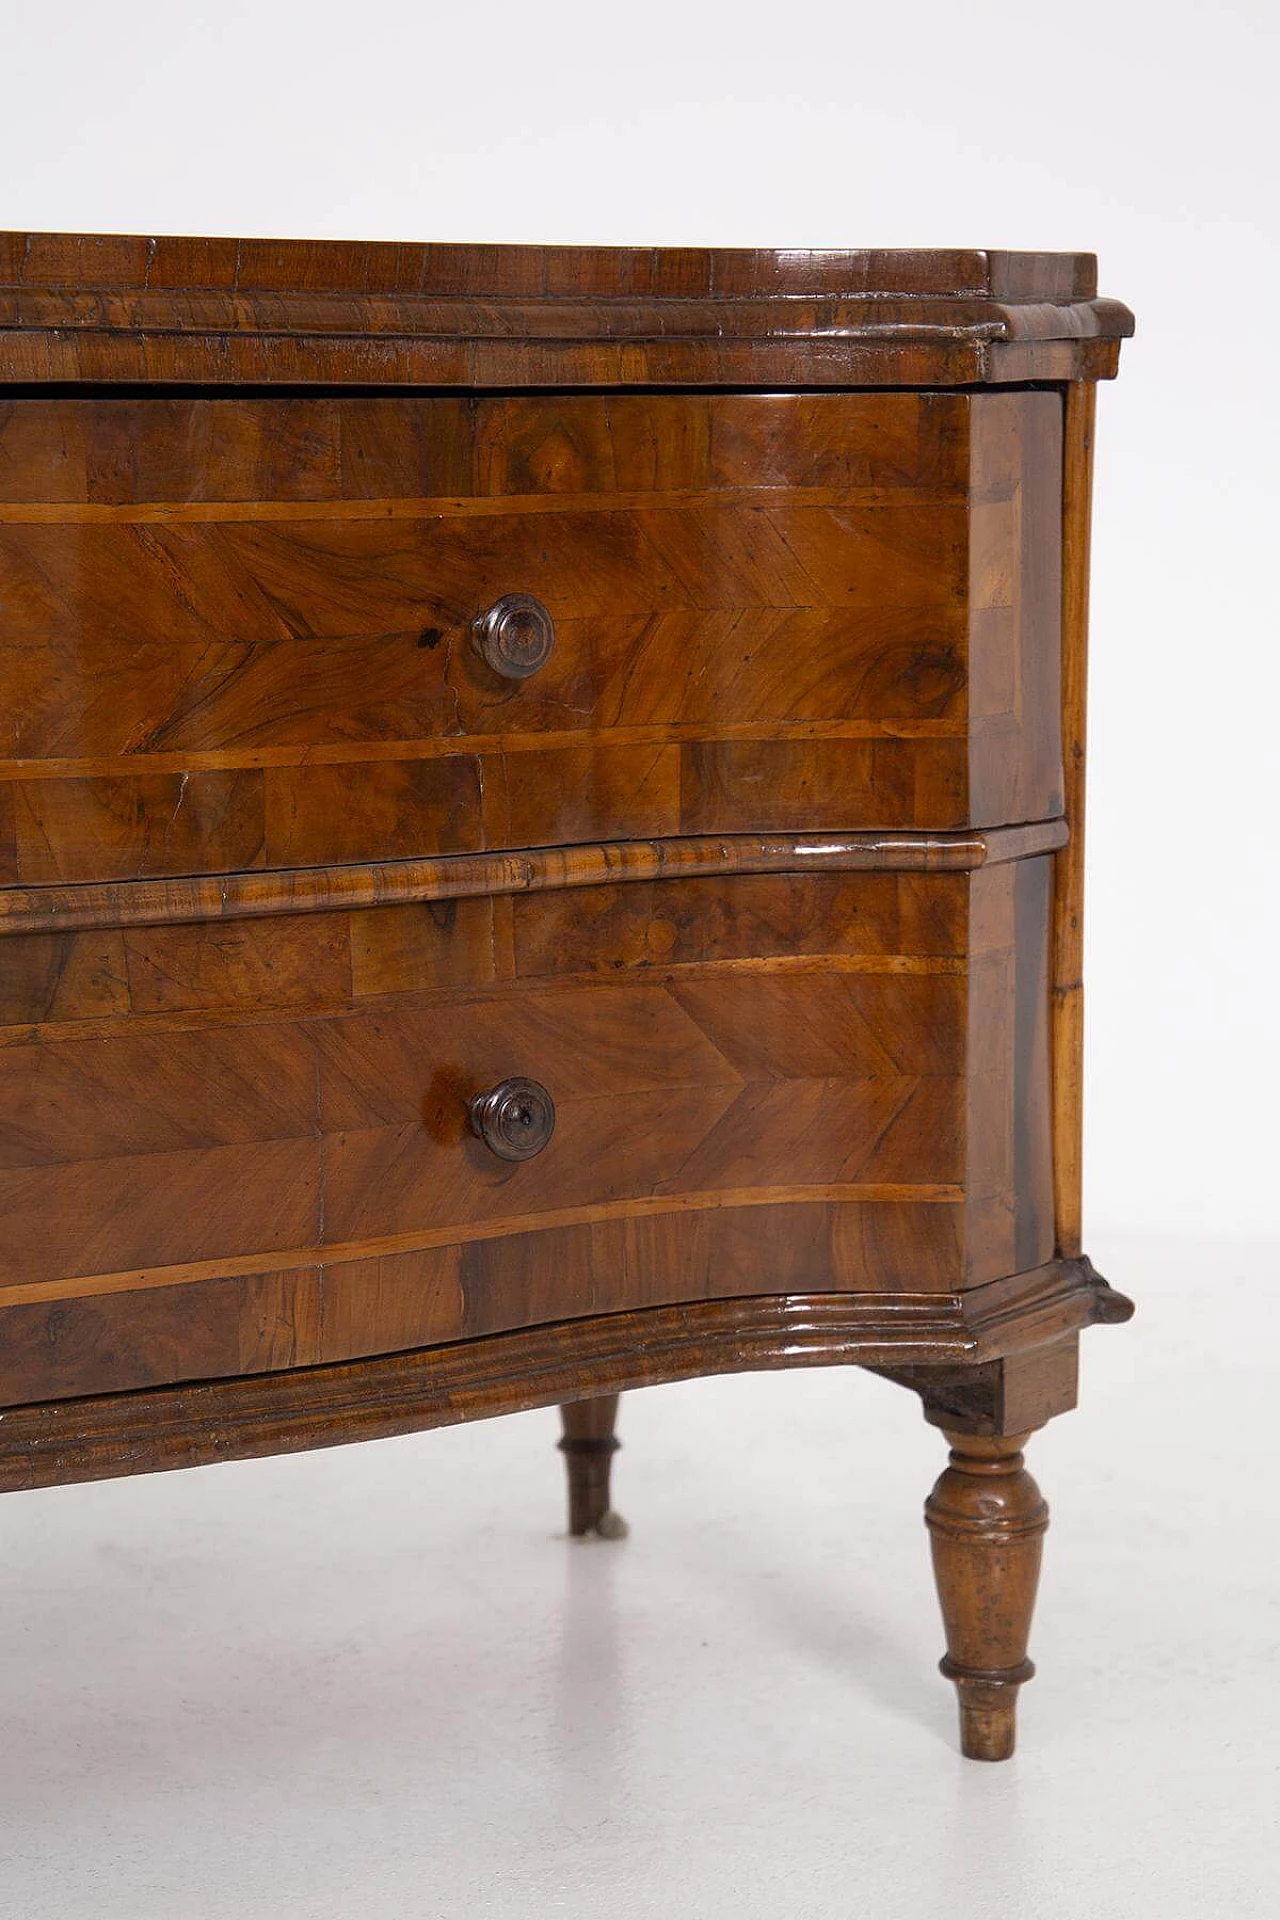 Walnut-root chest of drawers with inlaid decoration, 18th century 1408636